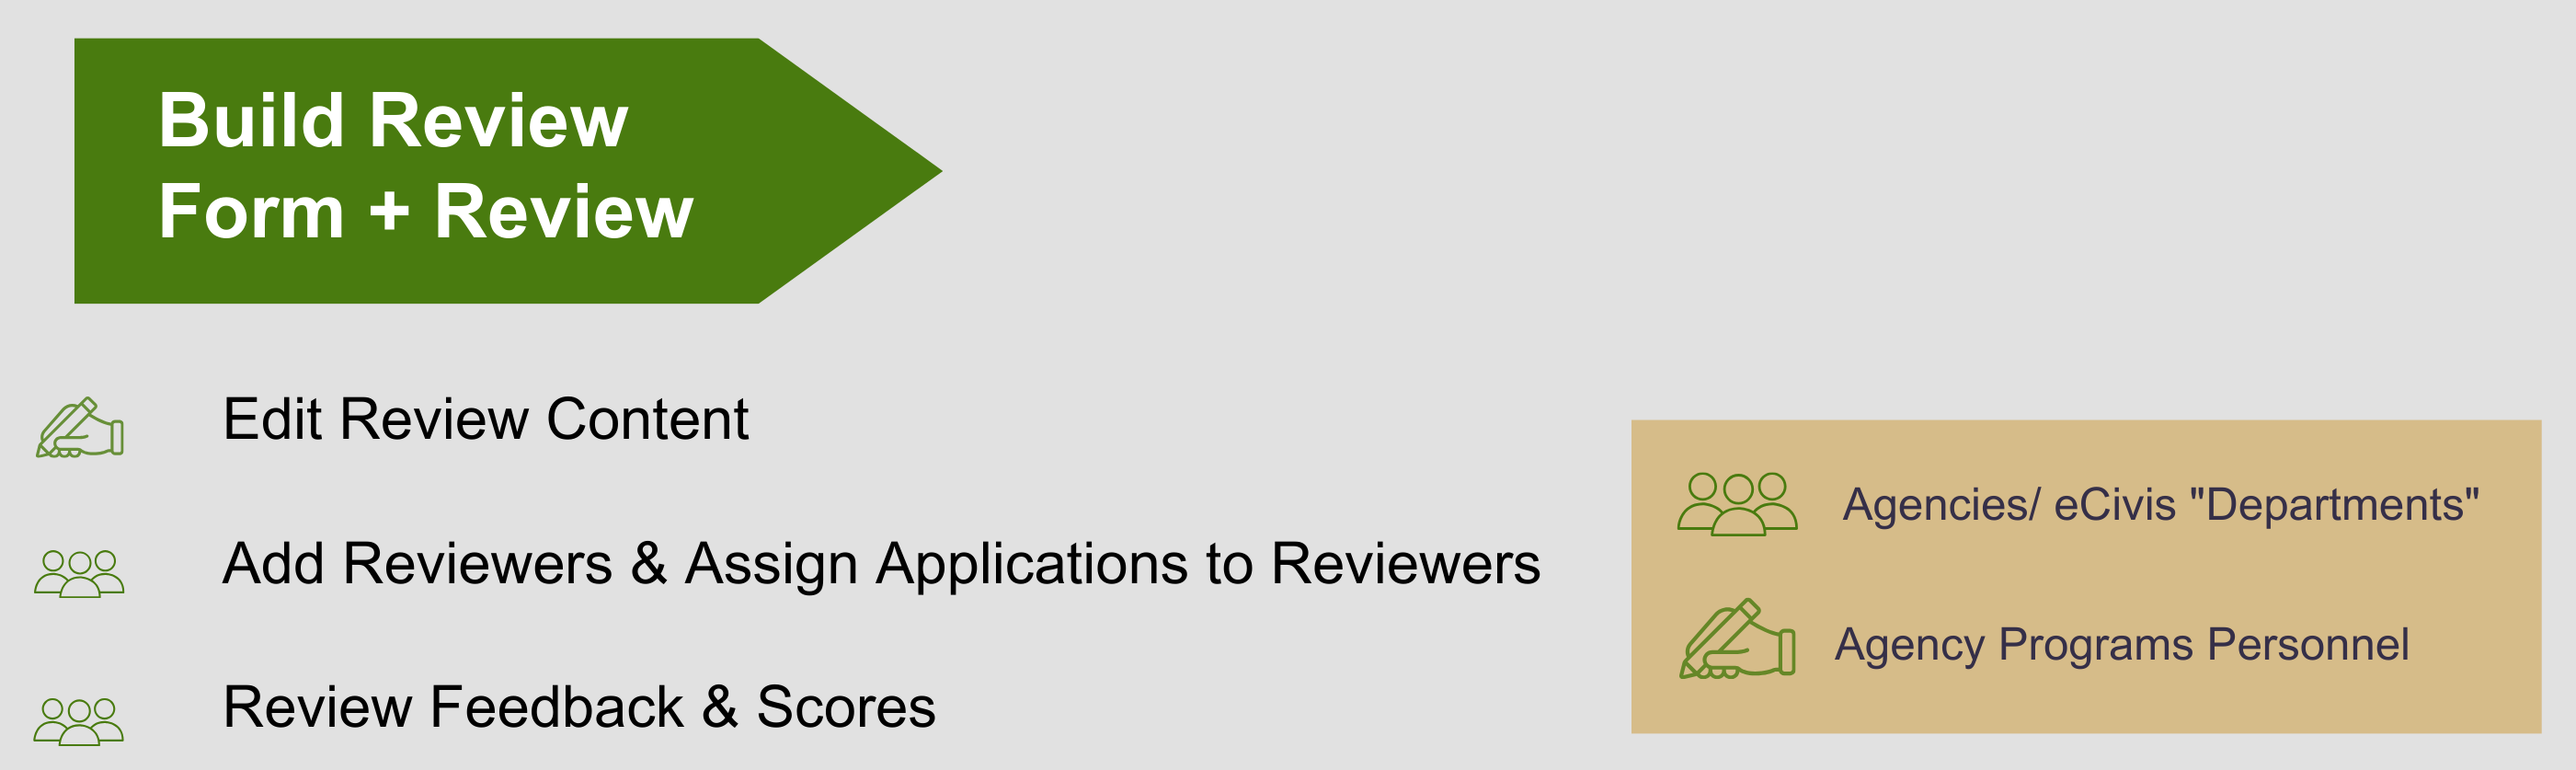 Once the application’s been published, Review Content should be edited, Reviewers added & assigned to specific applications, & Indiana State Agencies review Feedback & Scores provided by Reviewers.